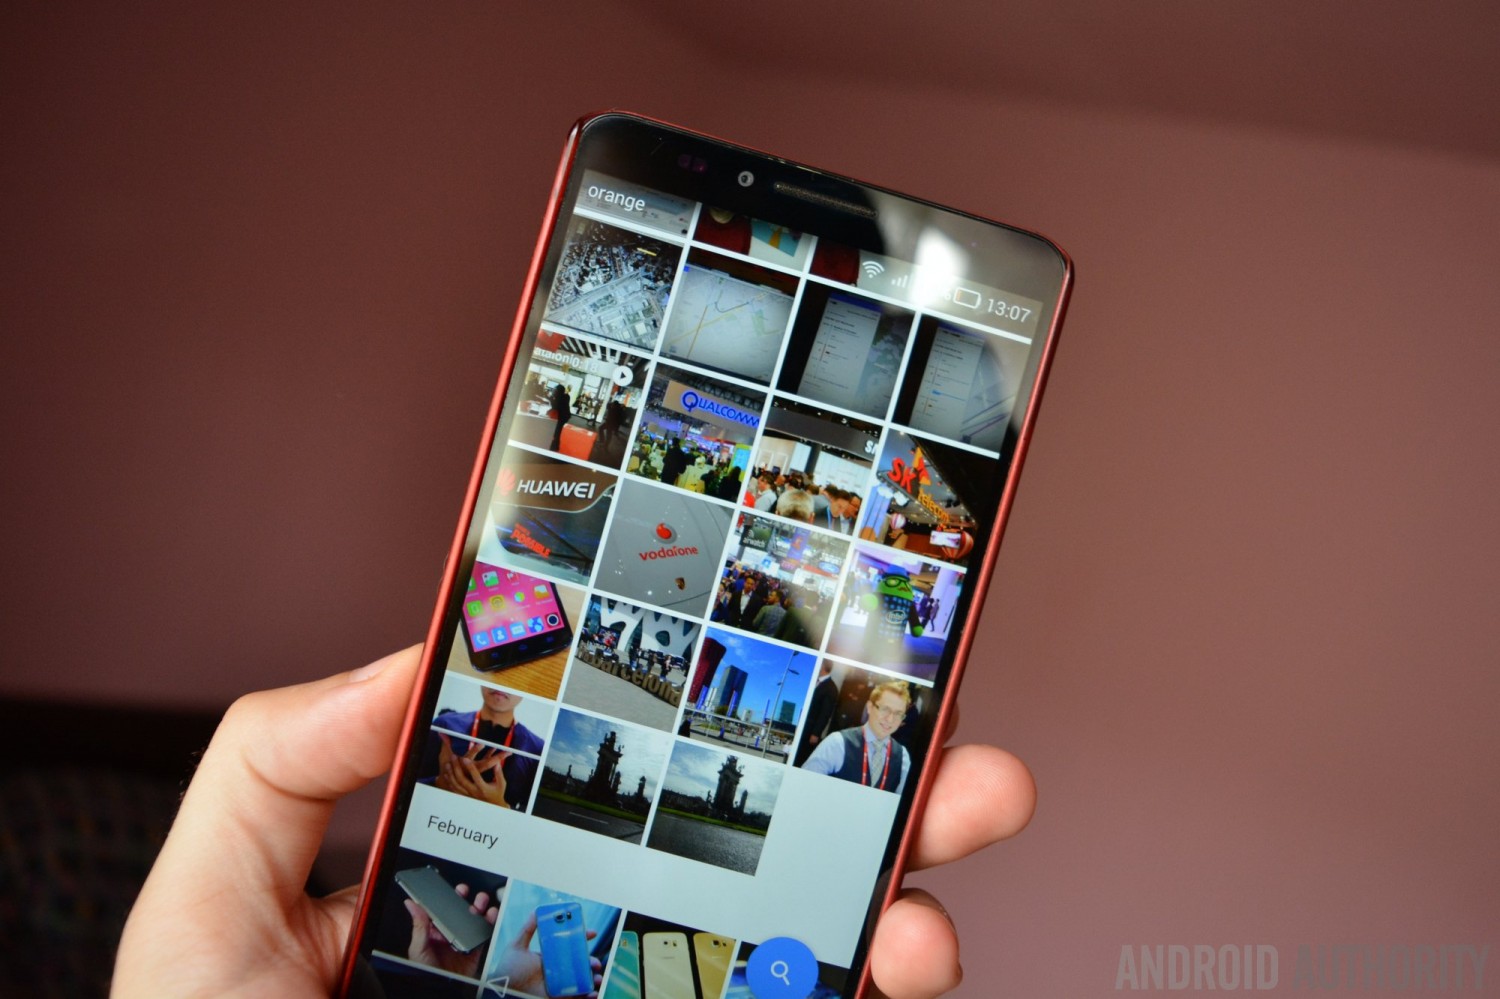 Gallery Apps for Android